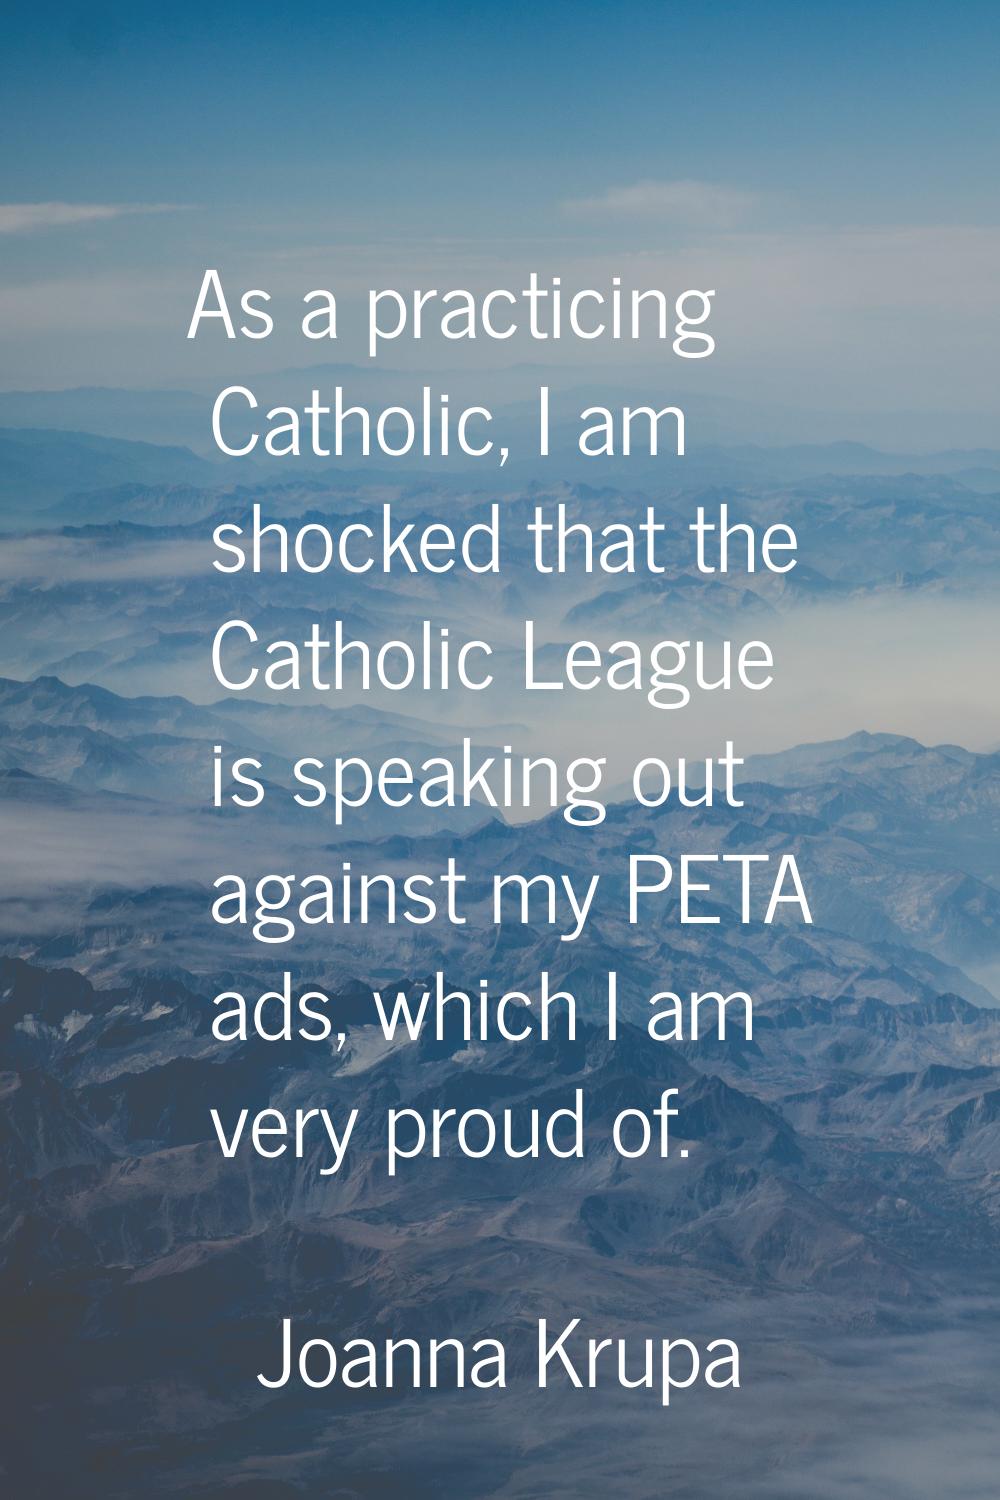 As a practicing Catholic, I am shocked that the Catholic League is speaking out against my PETA ads